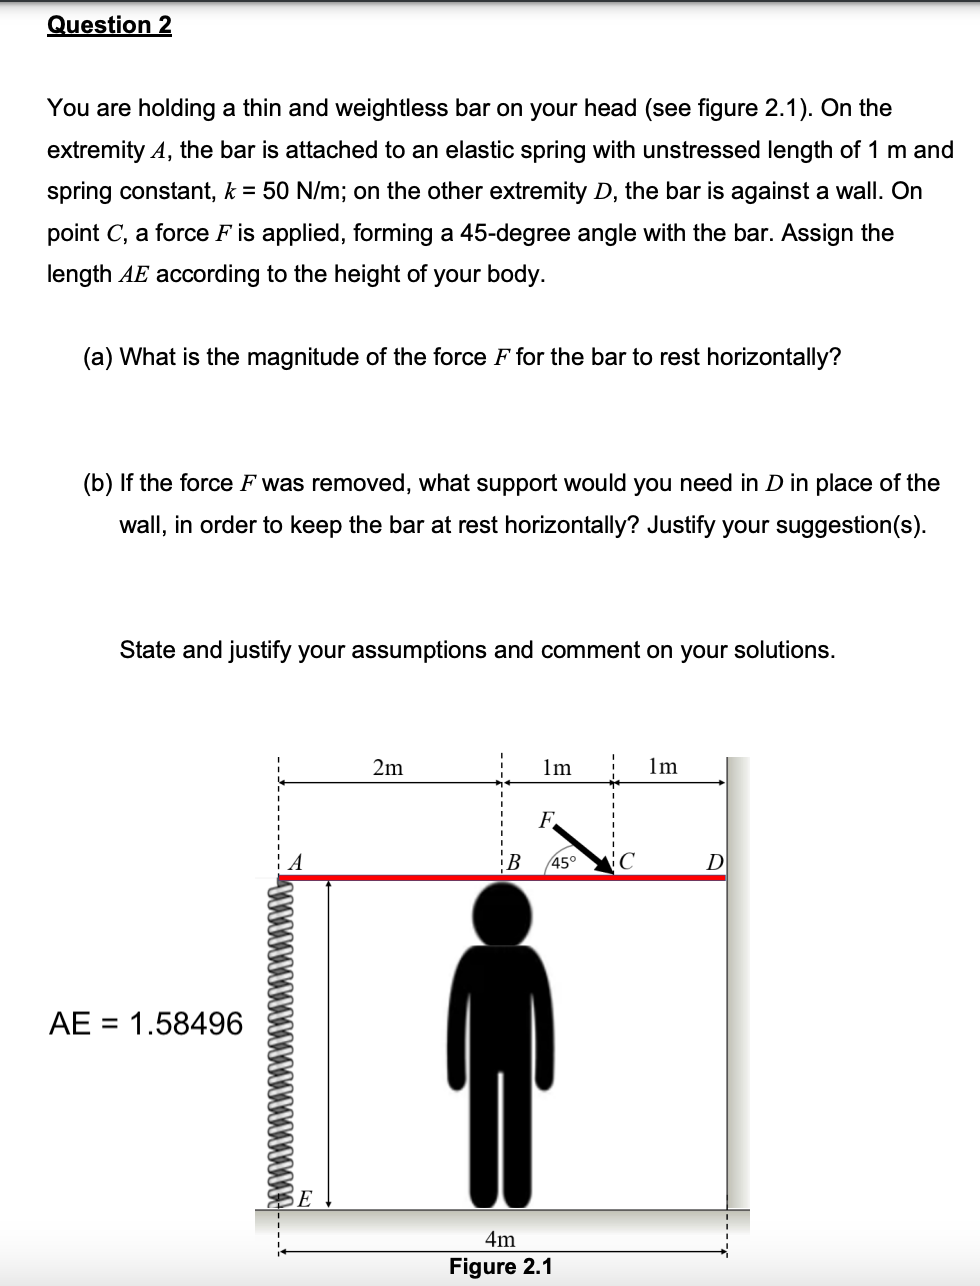 Question 2
You are holding a thin and weightless bar on your head (see figure 2.1). On the
extremity A, the bar is attached to an elastic spring with unstressed length of 1 m and
spring constant, k = 50 N/m; on the other extremity D, the bar is against a wall. On
point C, a force F is applied, forming a 45-degree angle with the bar. Assign the
length AE according to the height of your body.
(a) What is the magnitude of the force F for the bar to rest horizontally?
(b) If the force F was removed, what support would you need in D in place of the
wall, in order to keep the bar at rest horizontally? Justify your suggestion(s).
State and justify your assumptions and comment on your solutions.
2m
1m
1m
AE = 1.58496
SE
F
B 45°
4m
Figure 2.1
C
D